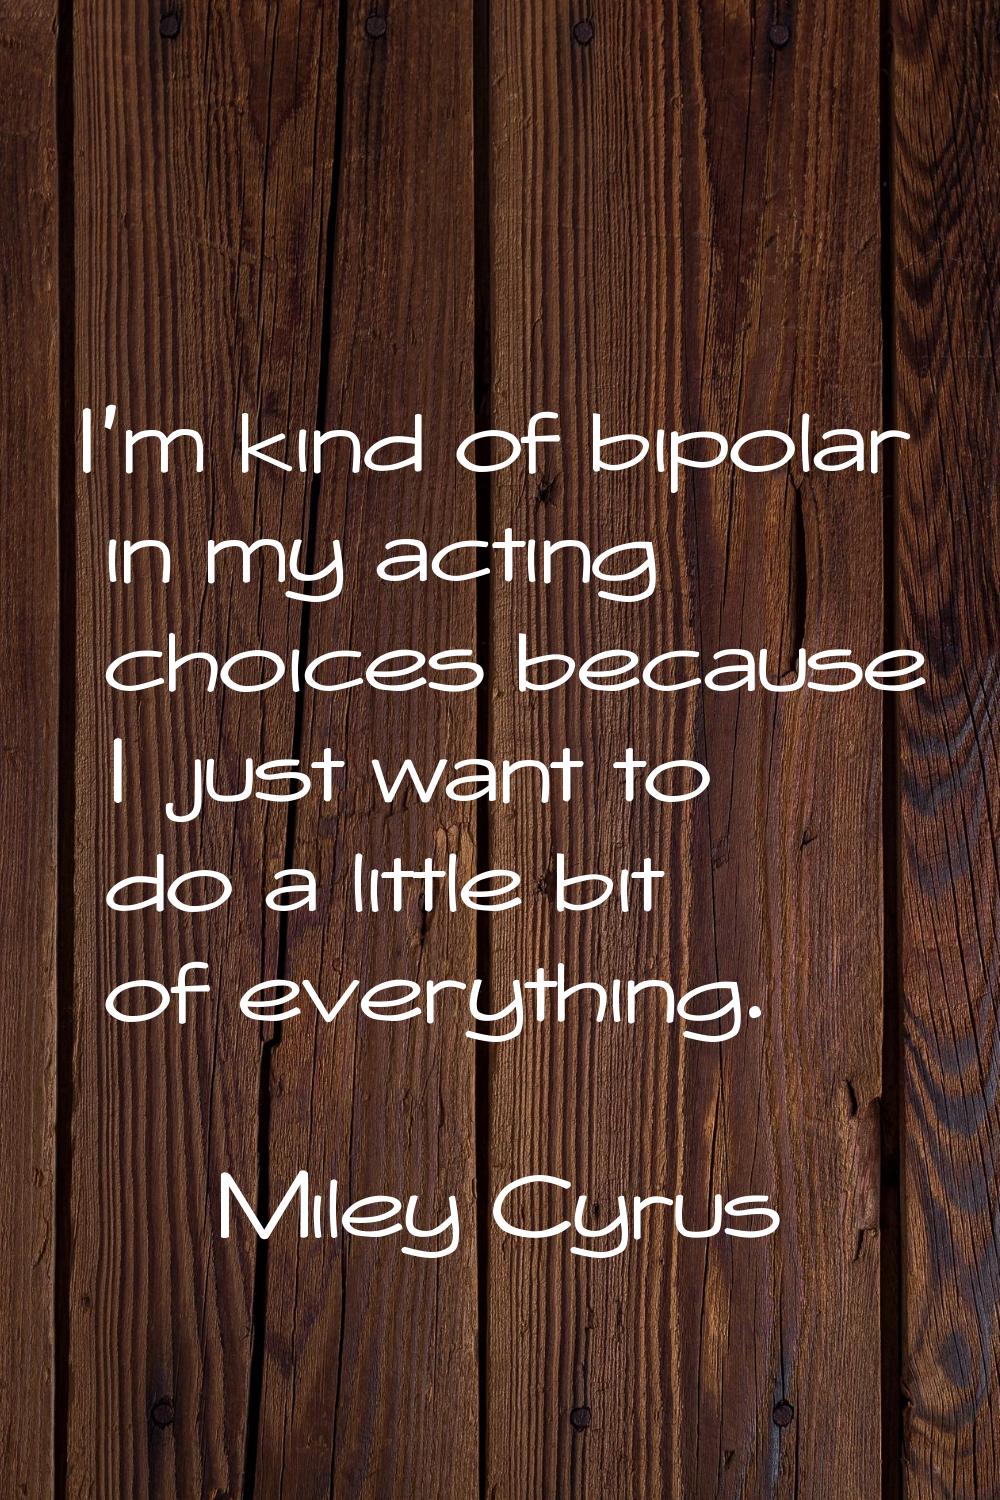 I'm kind of bipolar in my acting choices because I just want to do a little bit of everything.